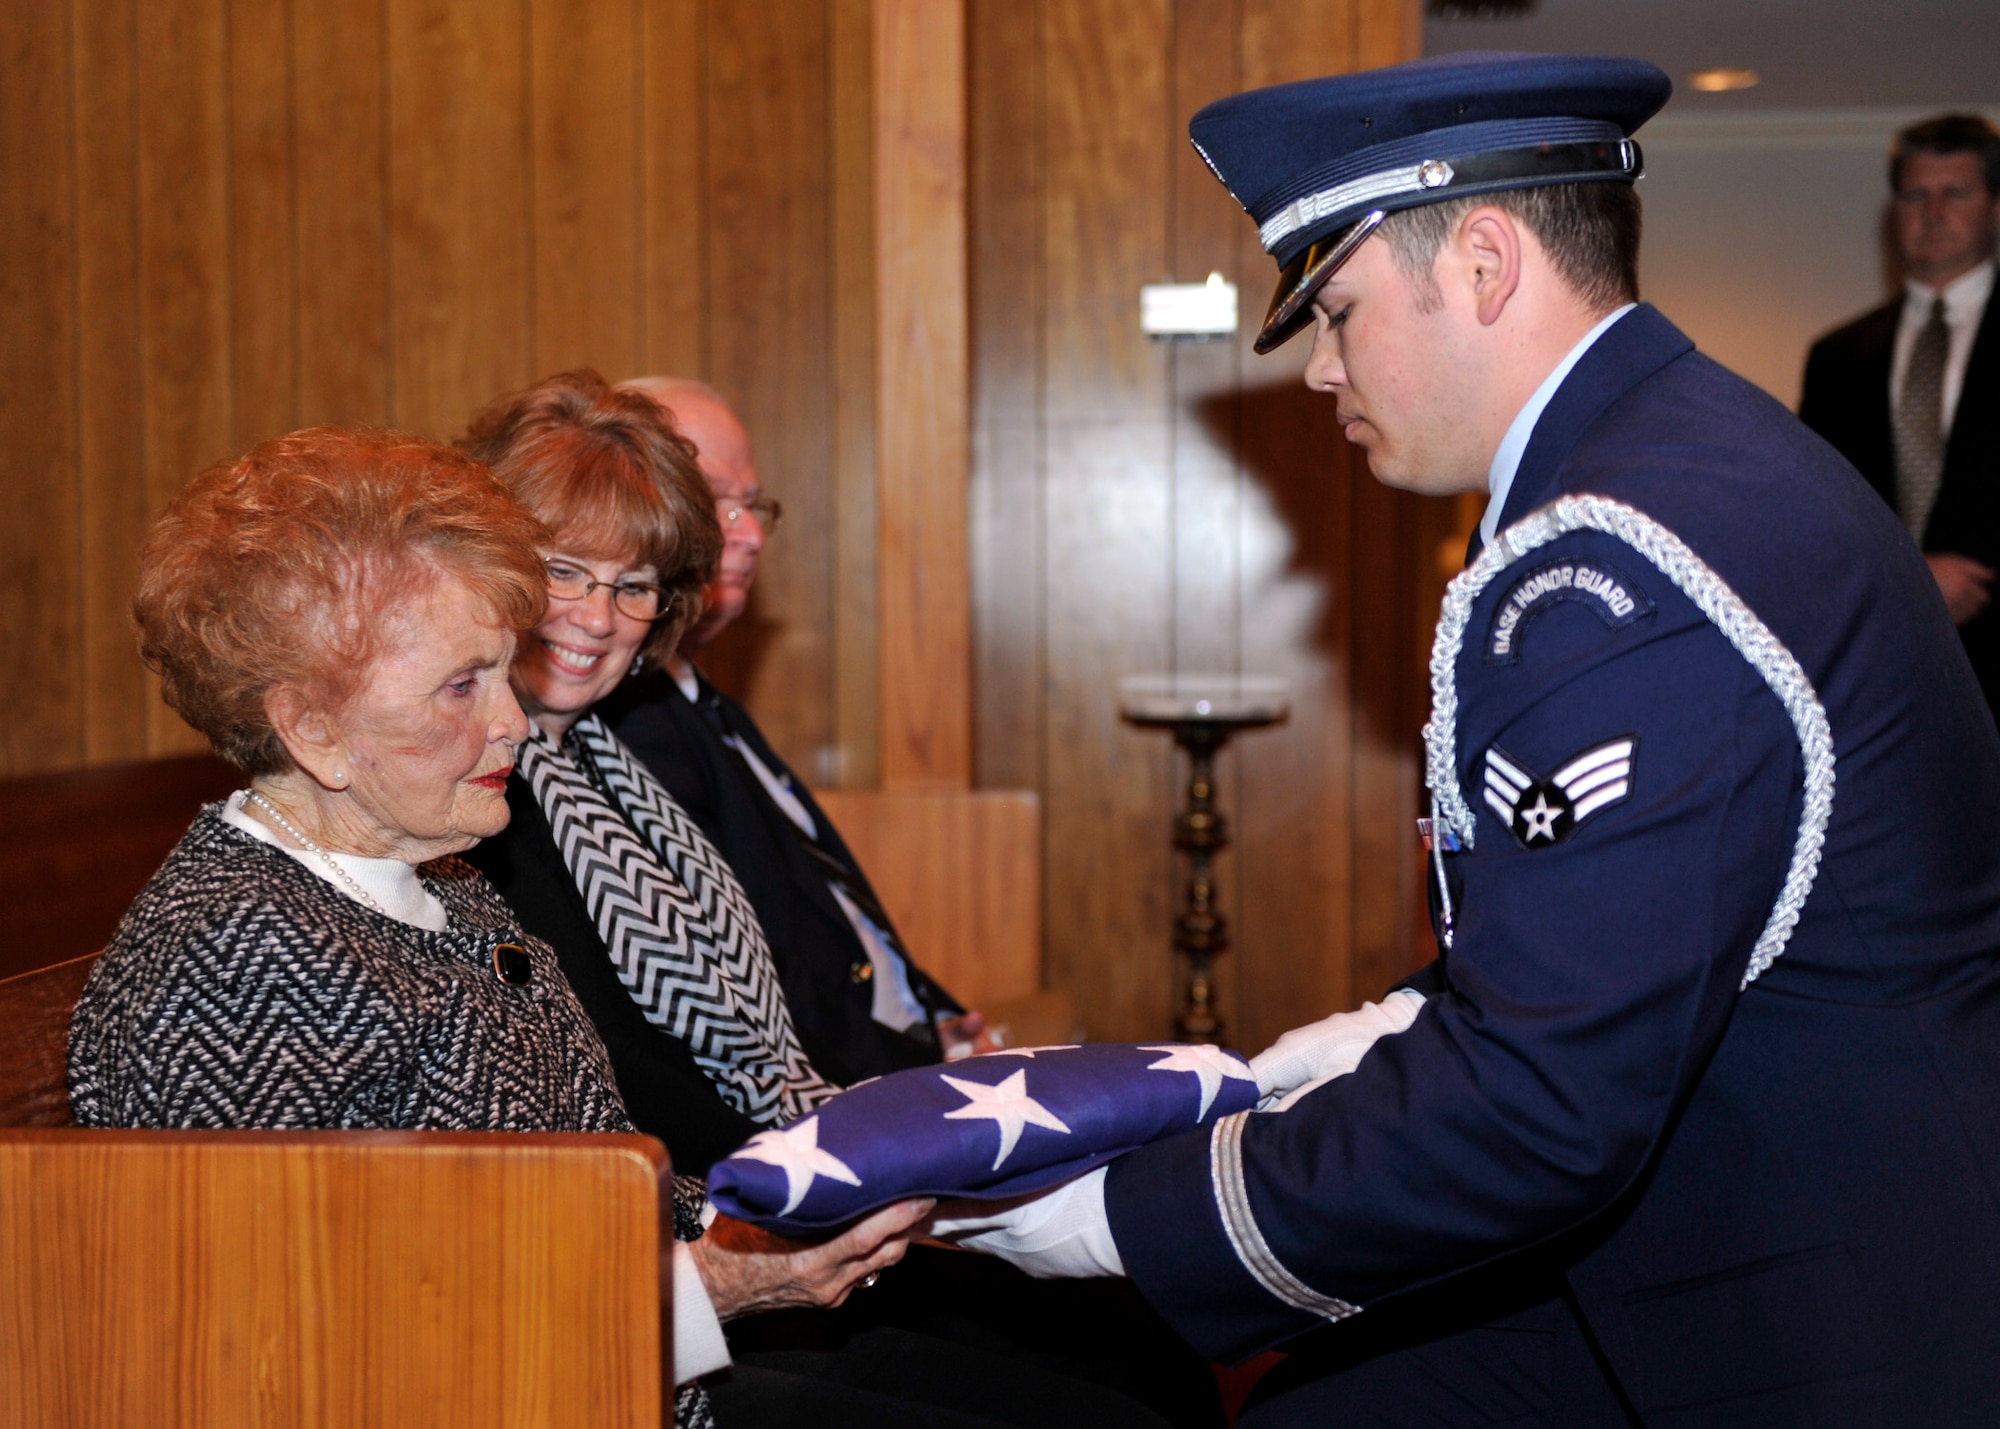 A Tyndall Honor Guard member presents the U.S. flag to the family of U.S. Air Force Col. (Ret.) Robert “Don” Gregor March 1 at the Wilson Funeral Home Chapel in Panama City, Fla. during his funeral. Gregor was the Tyndall base commander and the vice commander of the Weapons Center at one point in his career. (U.S. Air Force photo by Airman 1st Class Sergio A. Gamboa/Released)